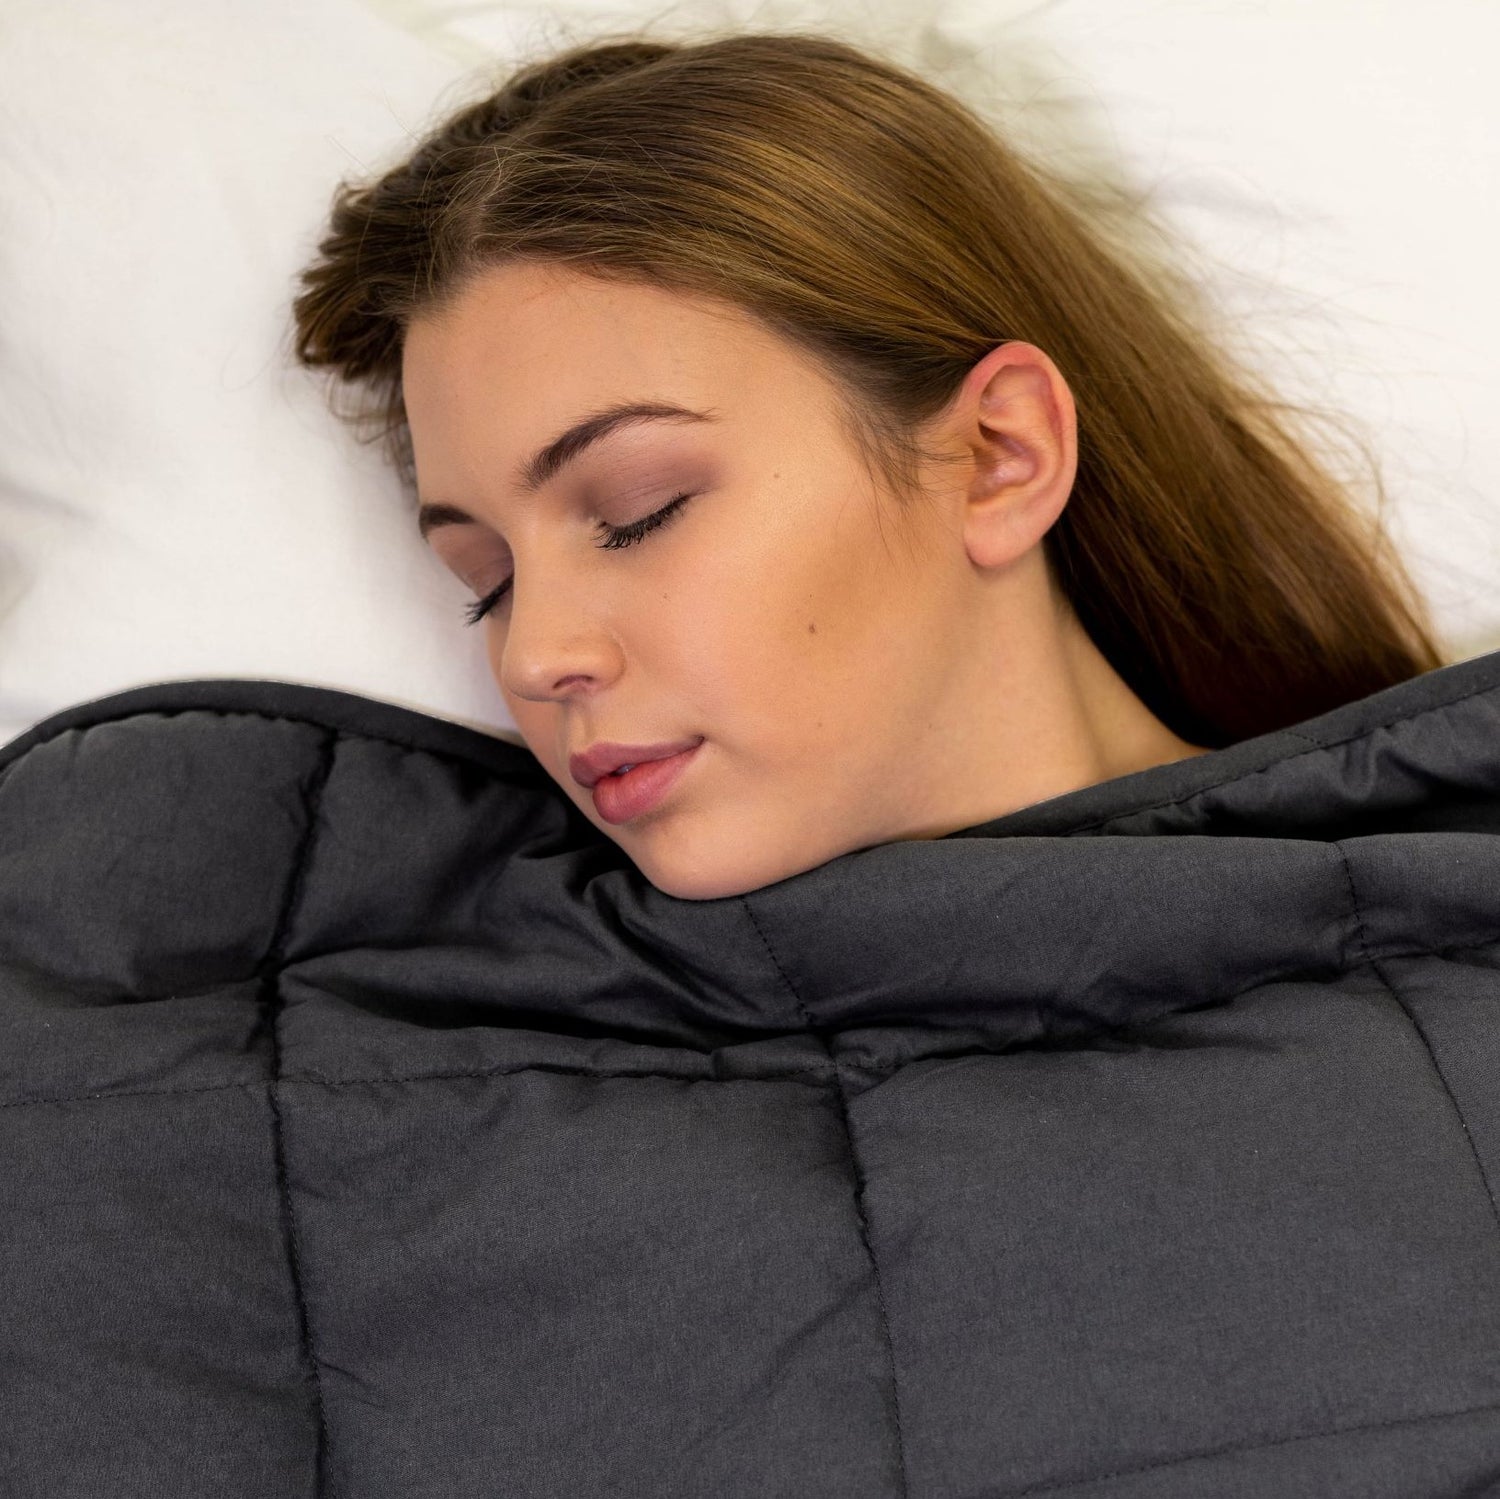 Grey weighted blanket, comforting and stress relieving